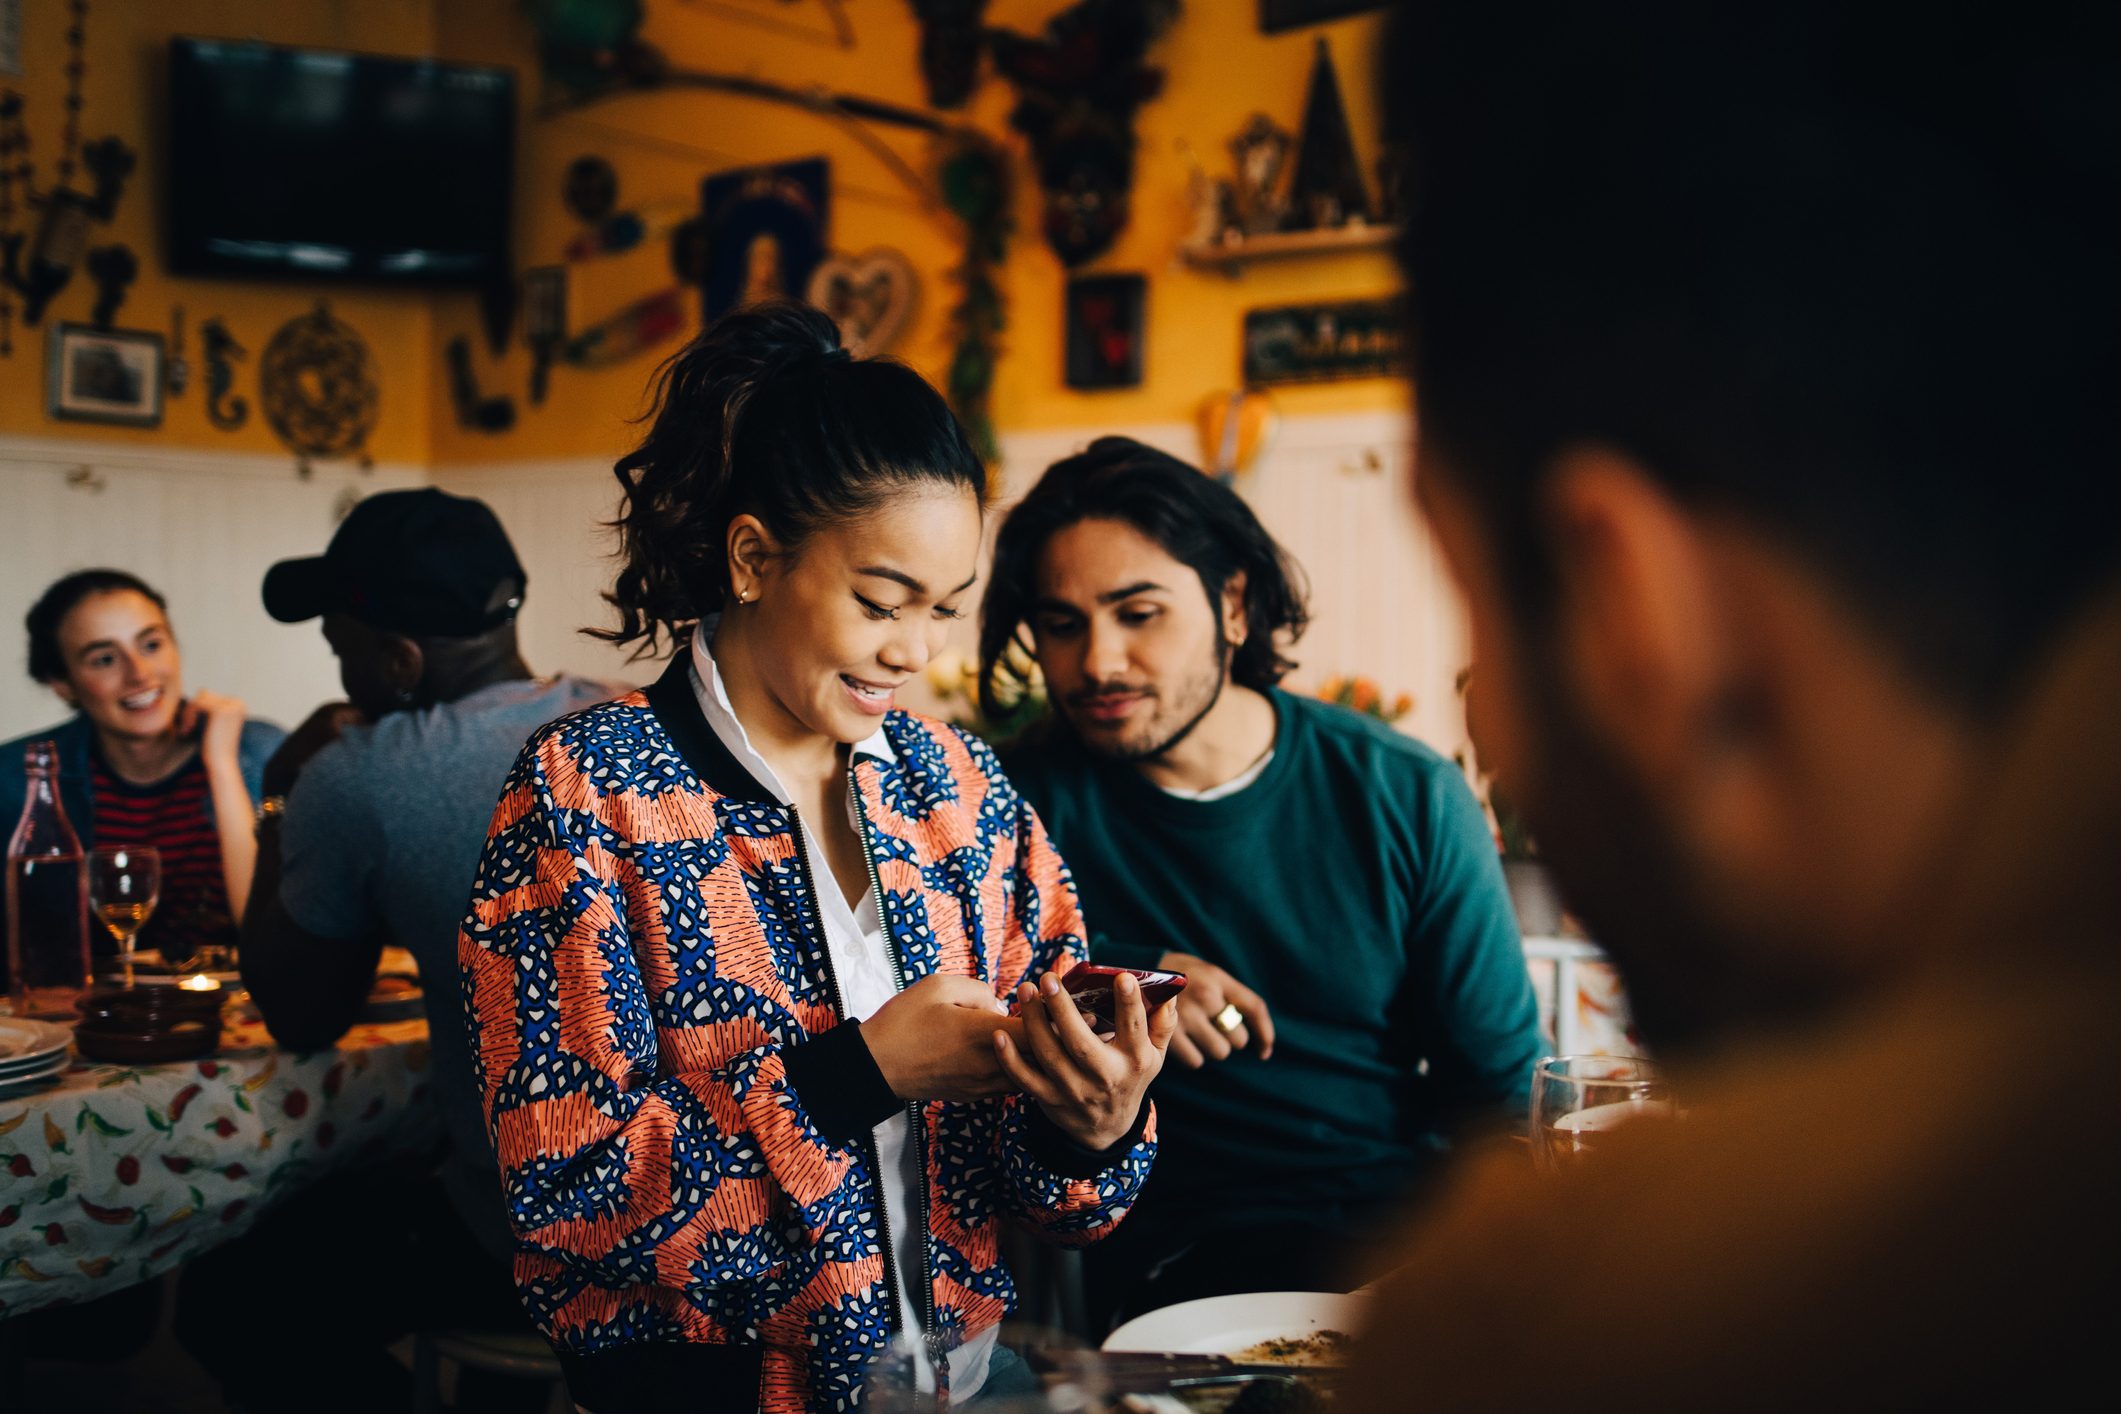 Smiling young woman sharing smart phone with male friend while sitting at restaurant during dinner party